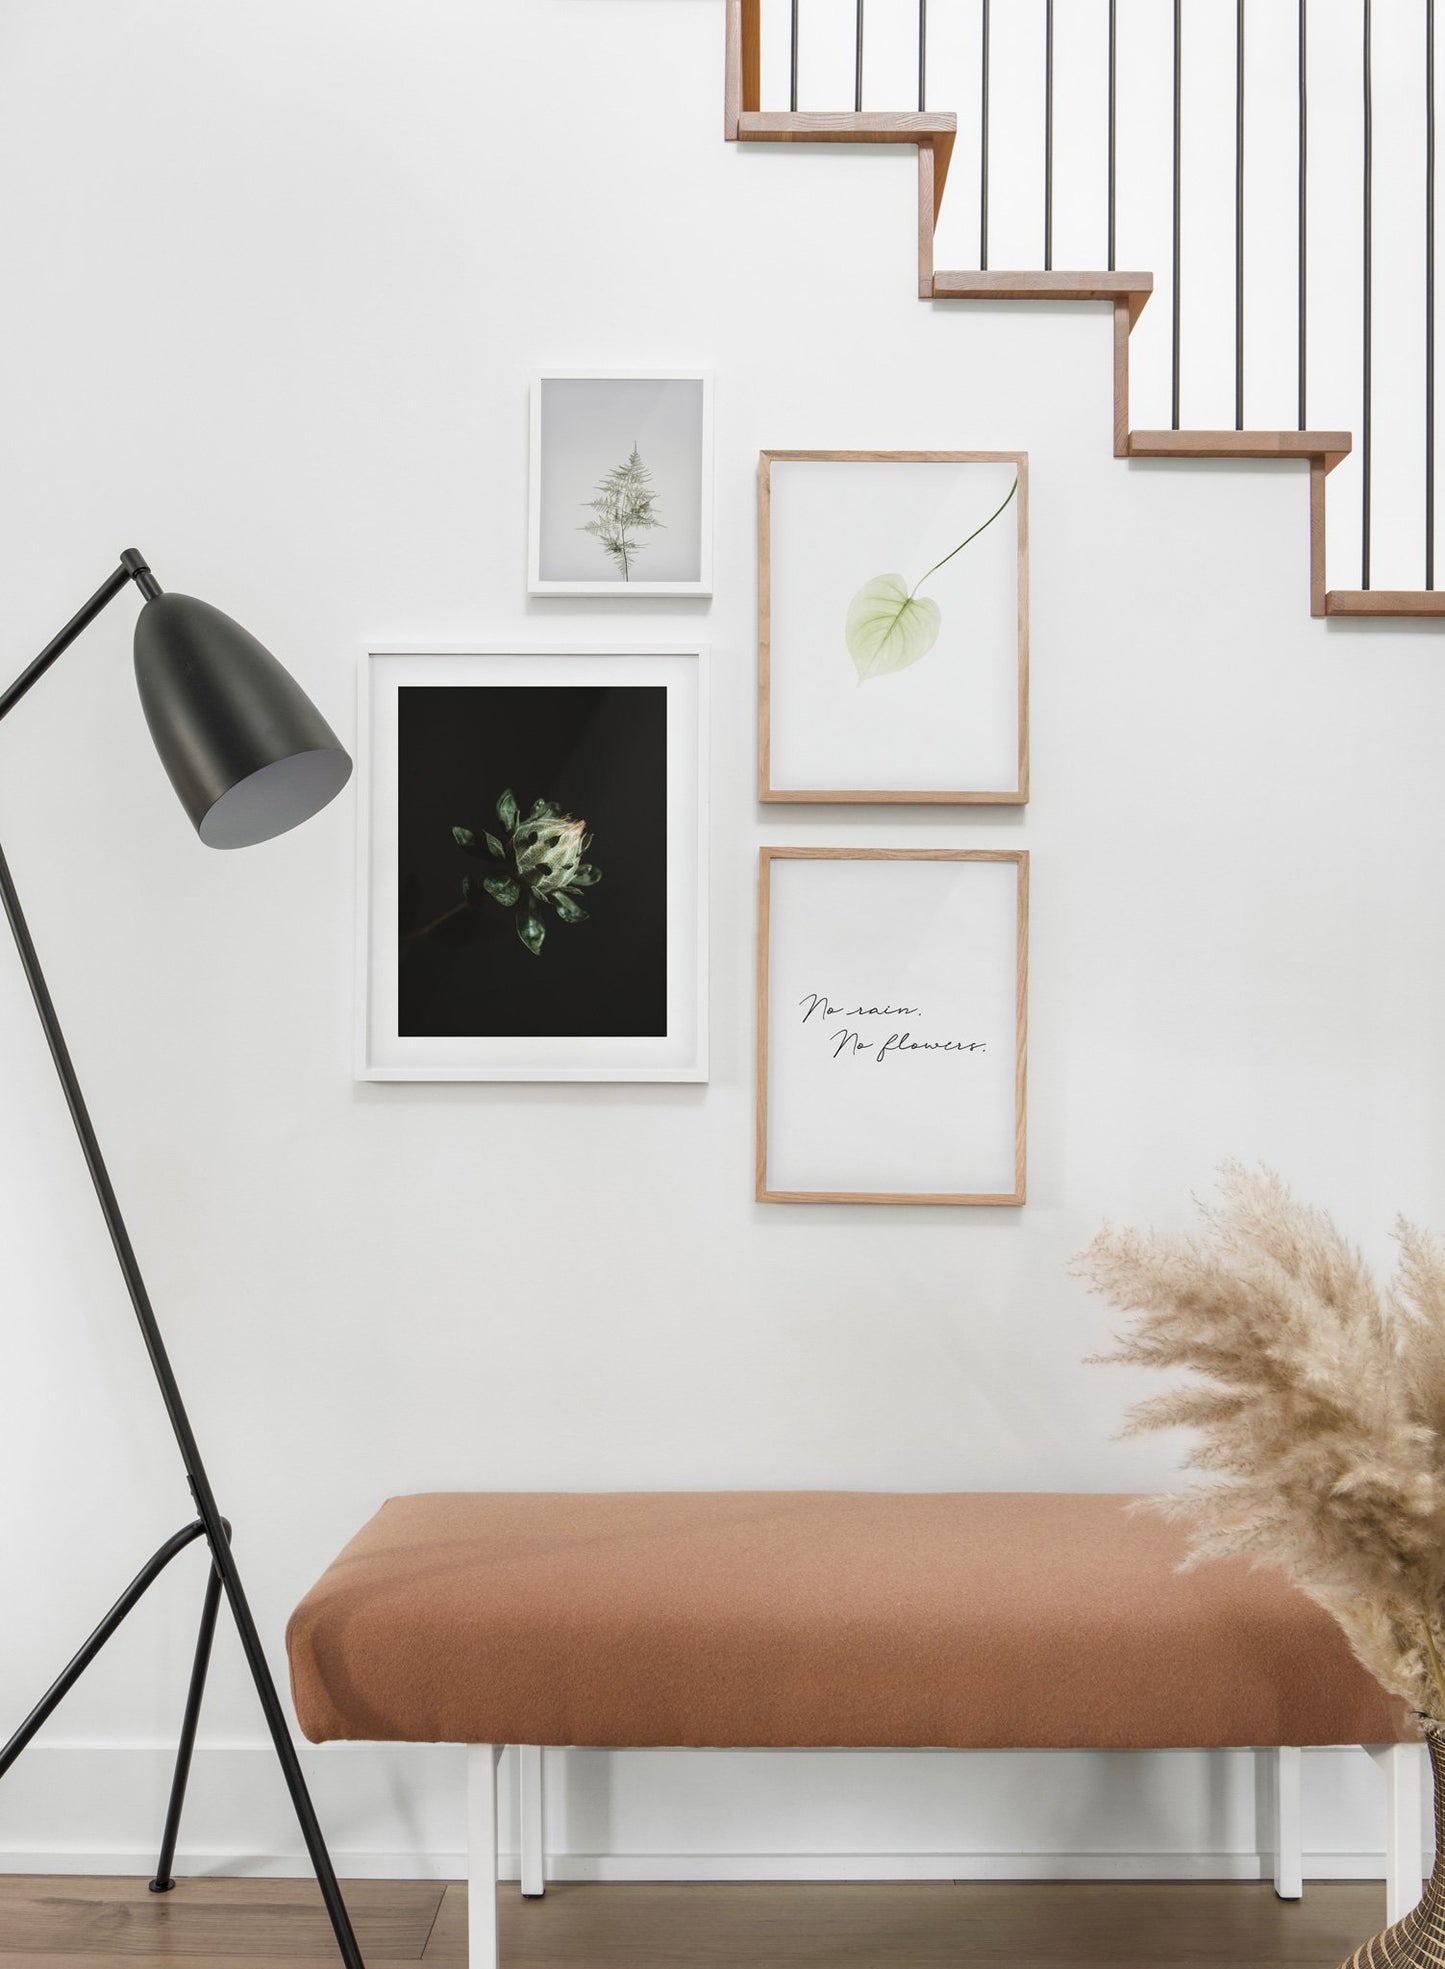 Blooming Plant modern minimalist photography poster by Opposite Wall - Hallway with staircase